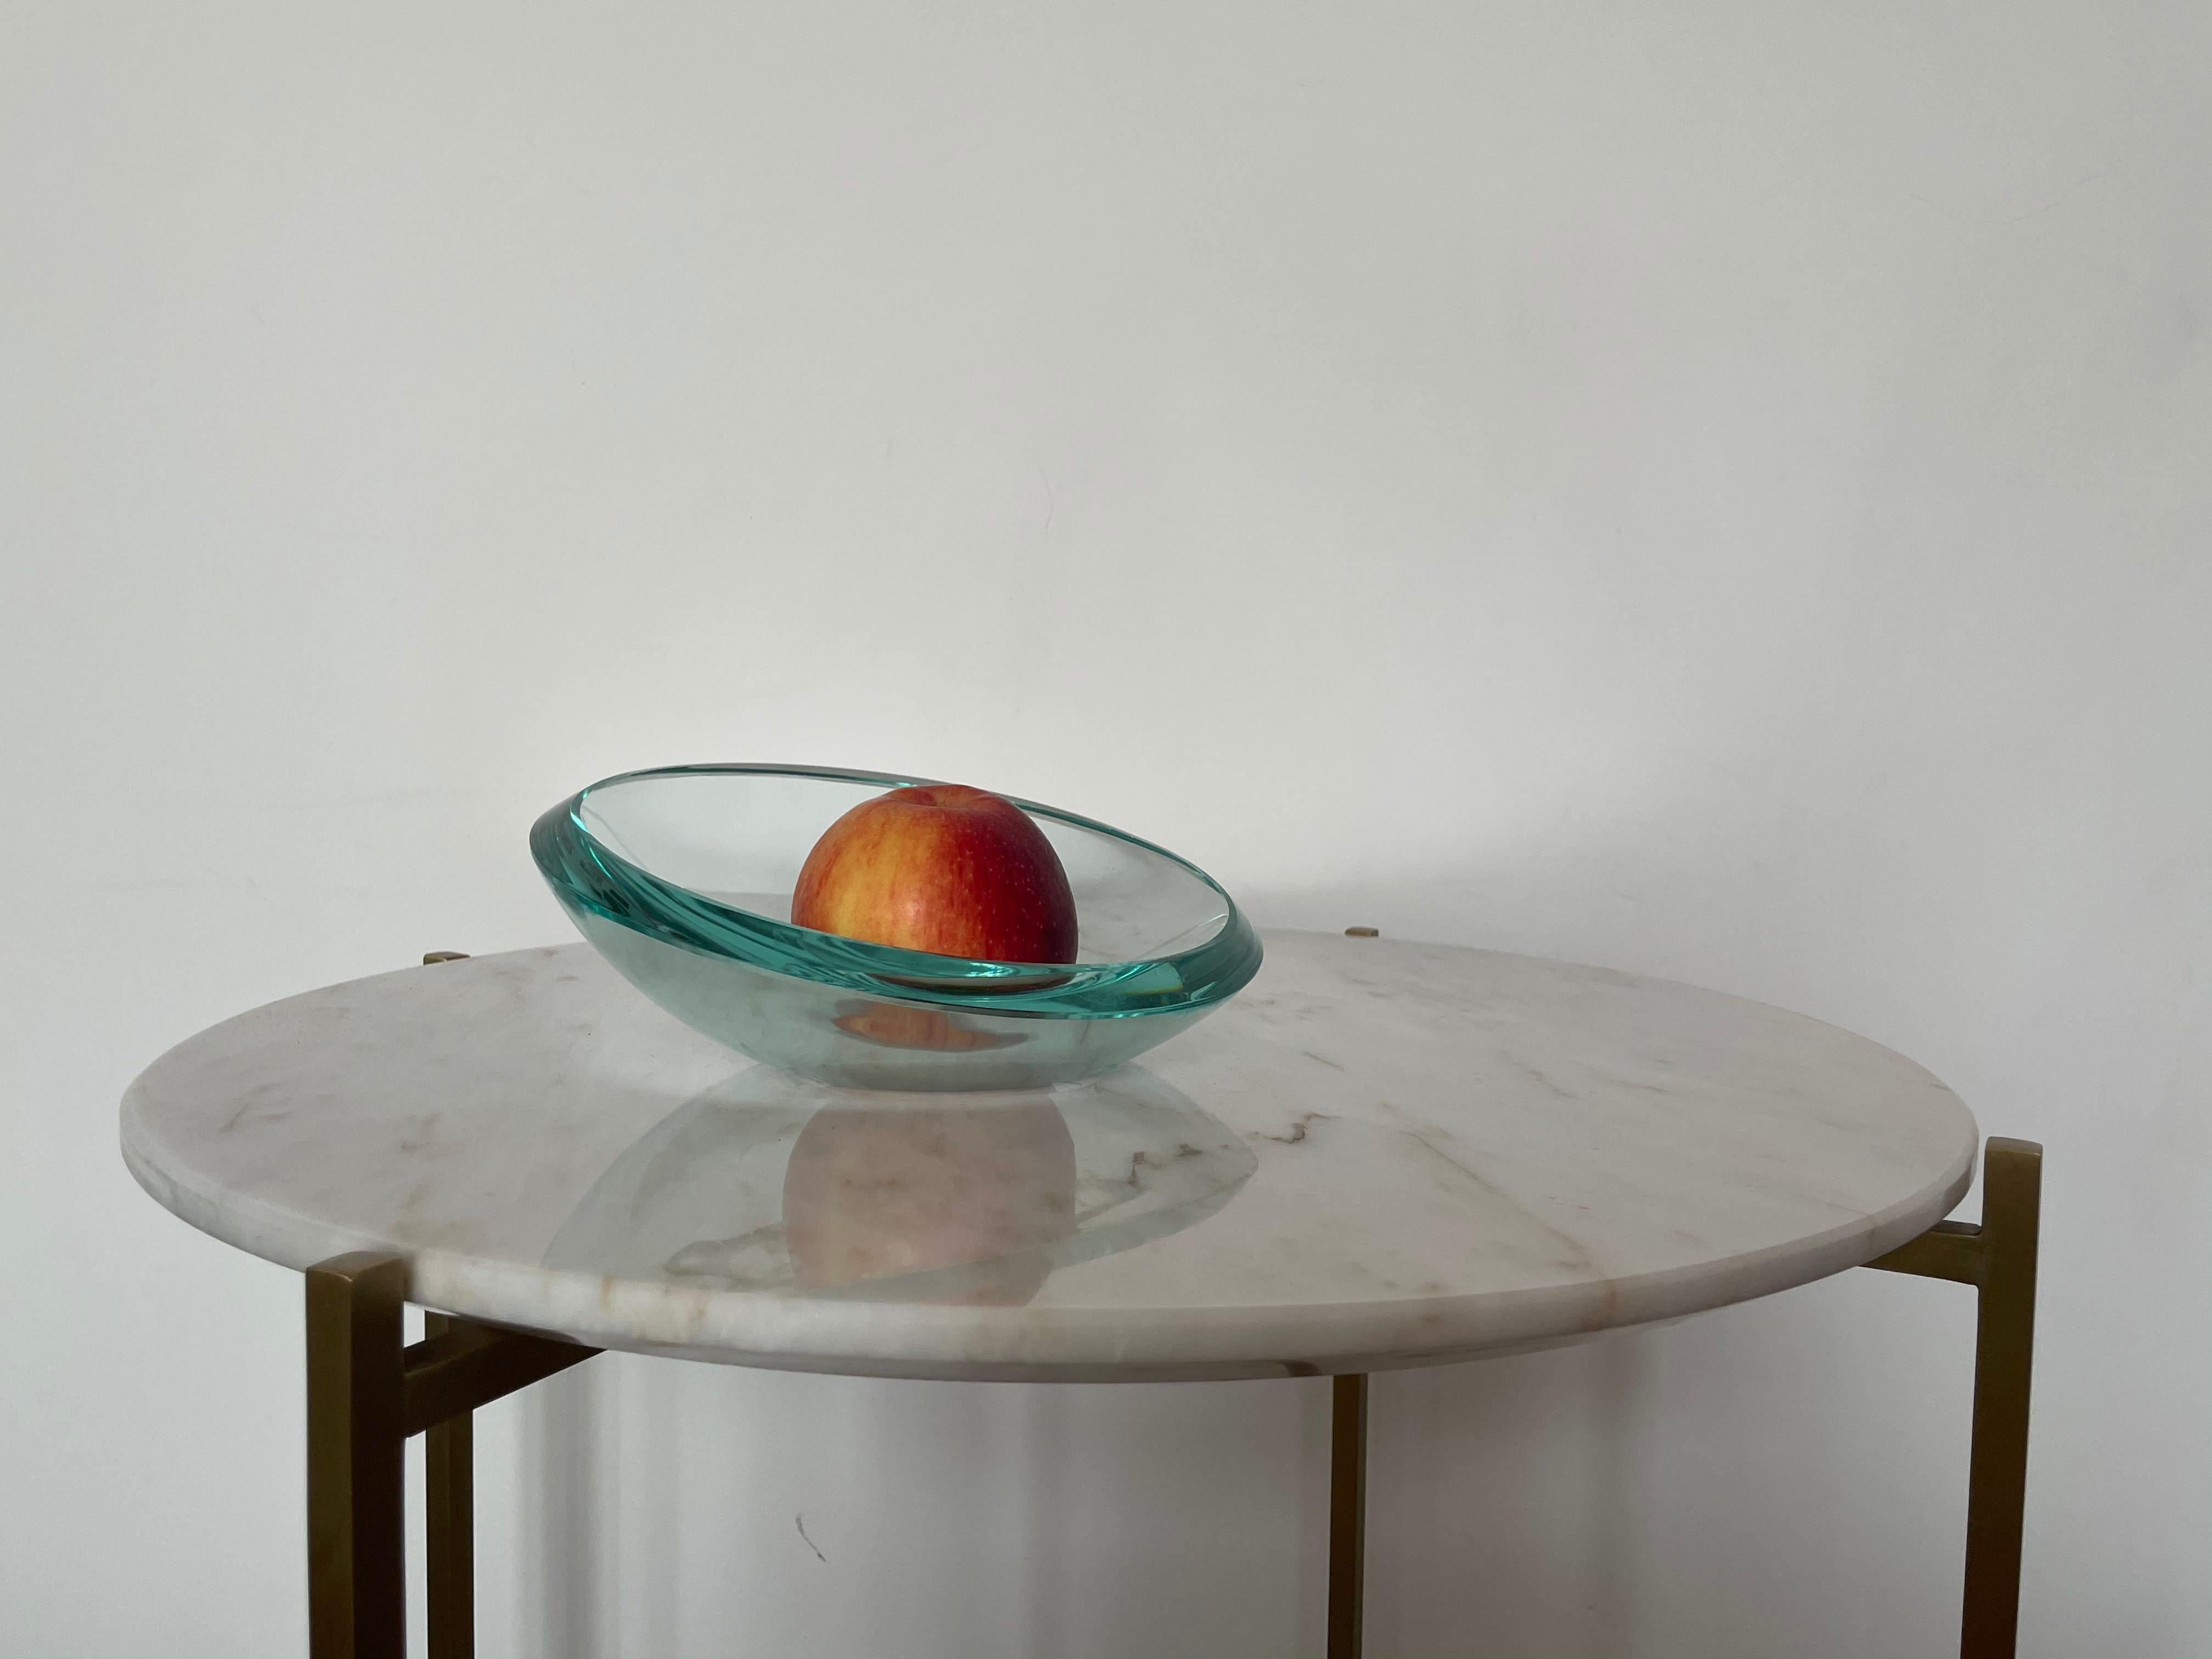 A 20th-century collectible vintage centerpiece, decorative bowl, or dish designed by the notable Italian brand that still manufactures and collaborates with grand designers to this day. This elegantly curved bowl crafted with quality art glass